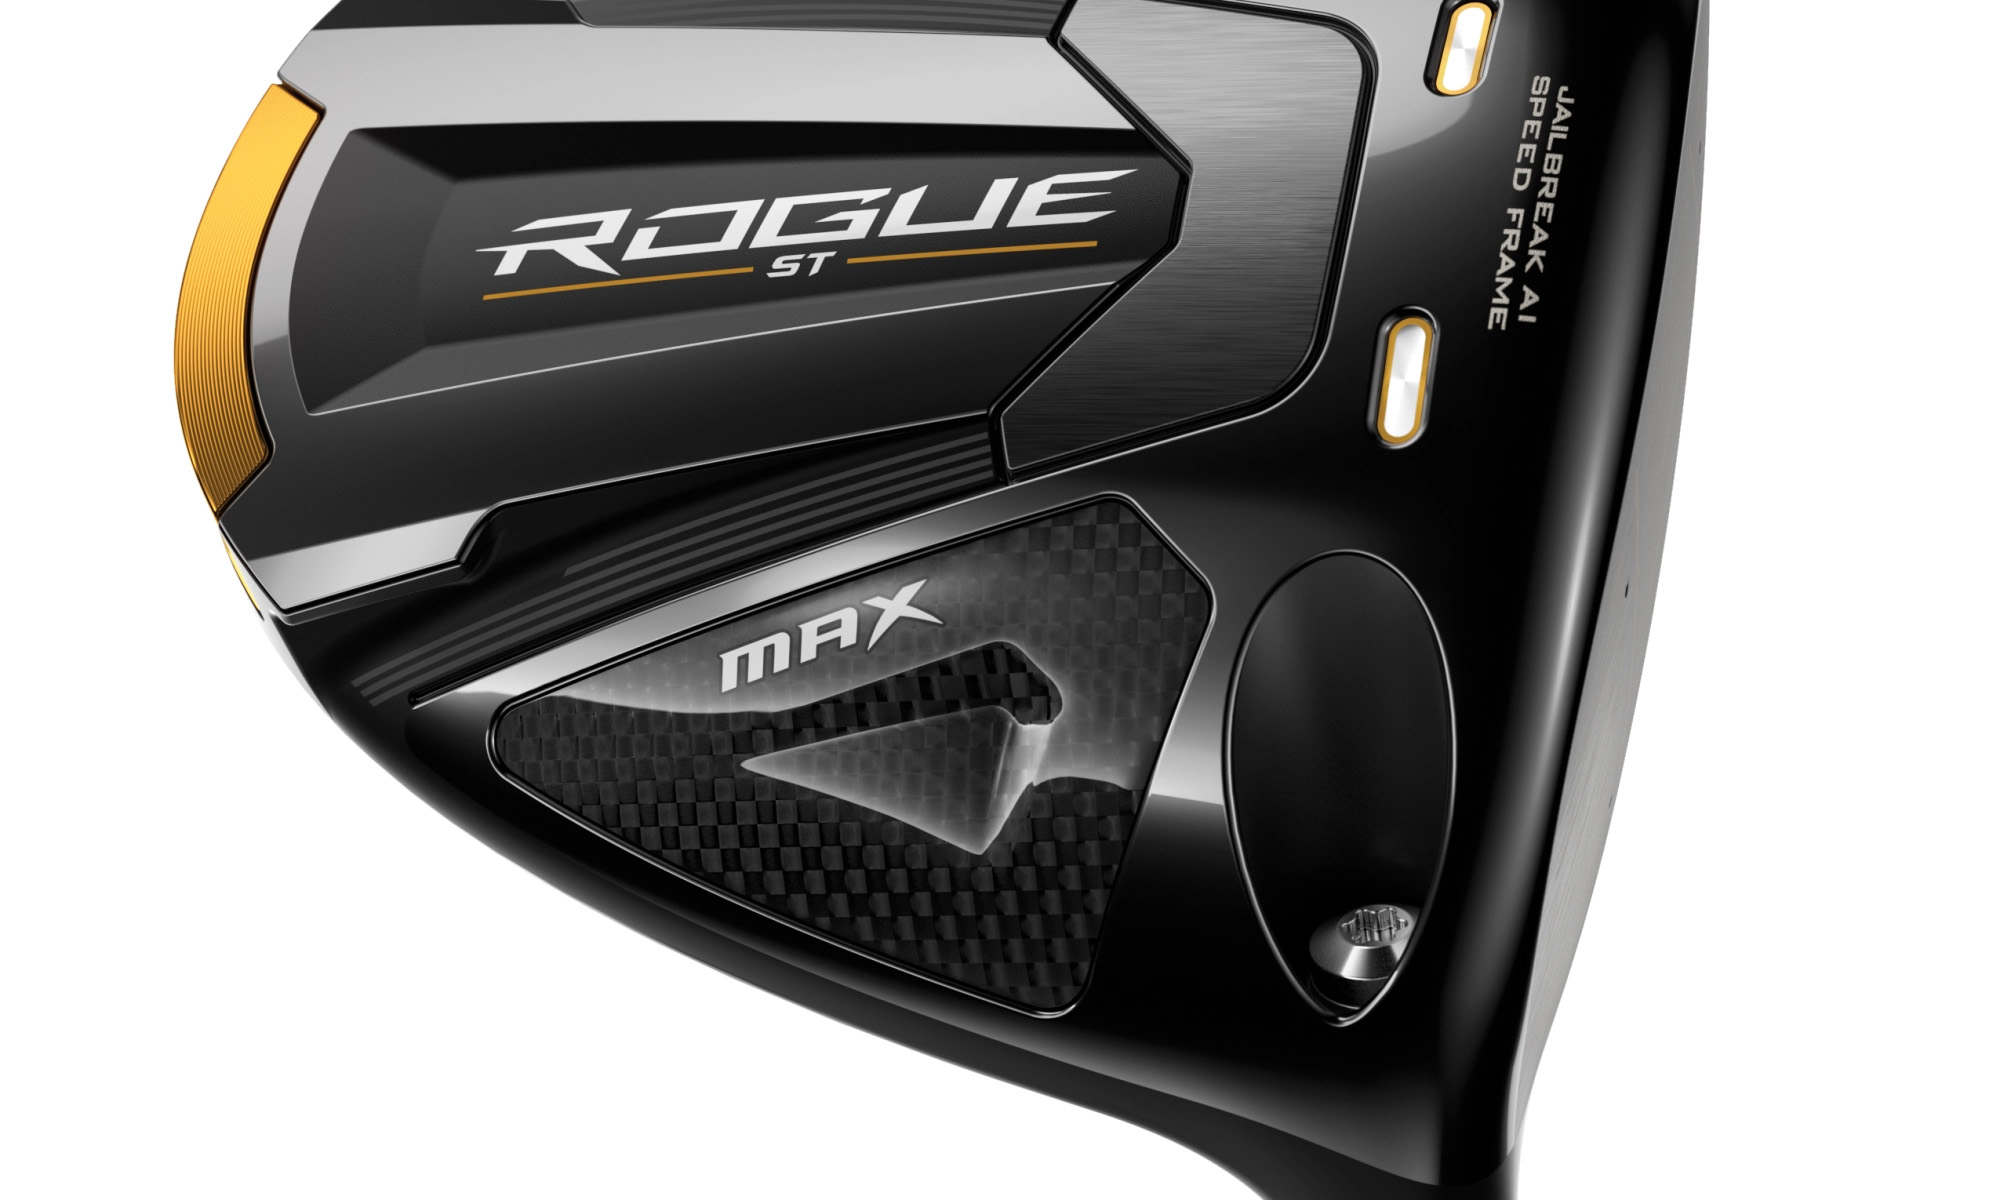 Callaway Rogue ST  their fastest golf drivers yet?